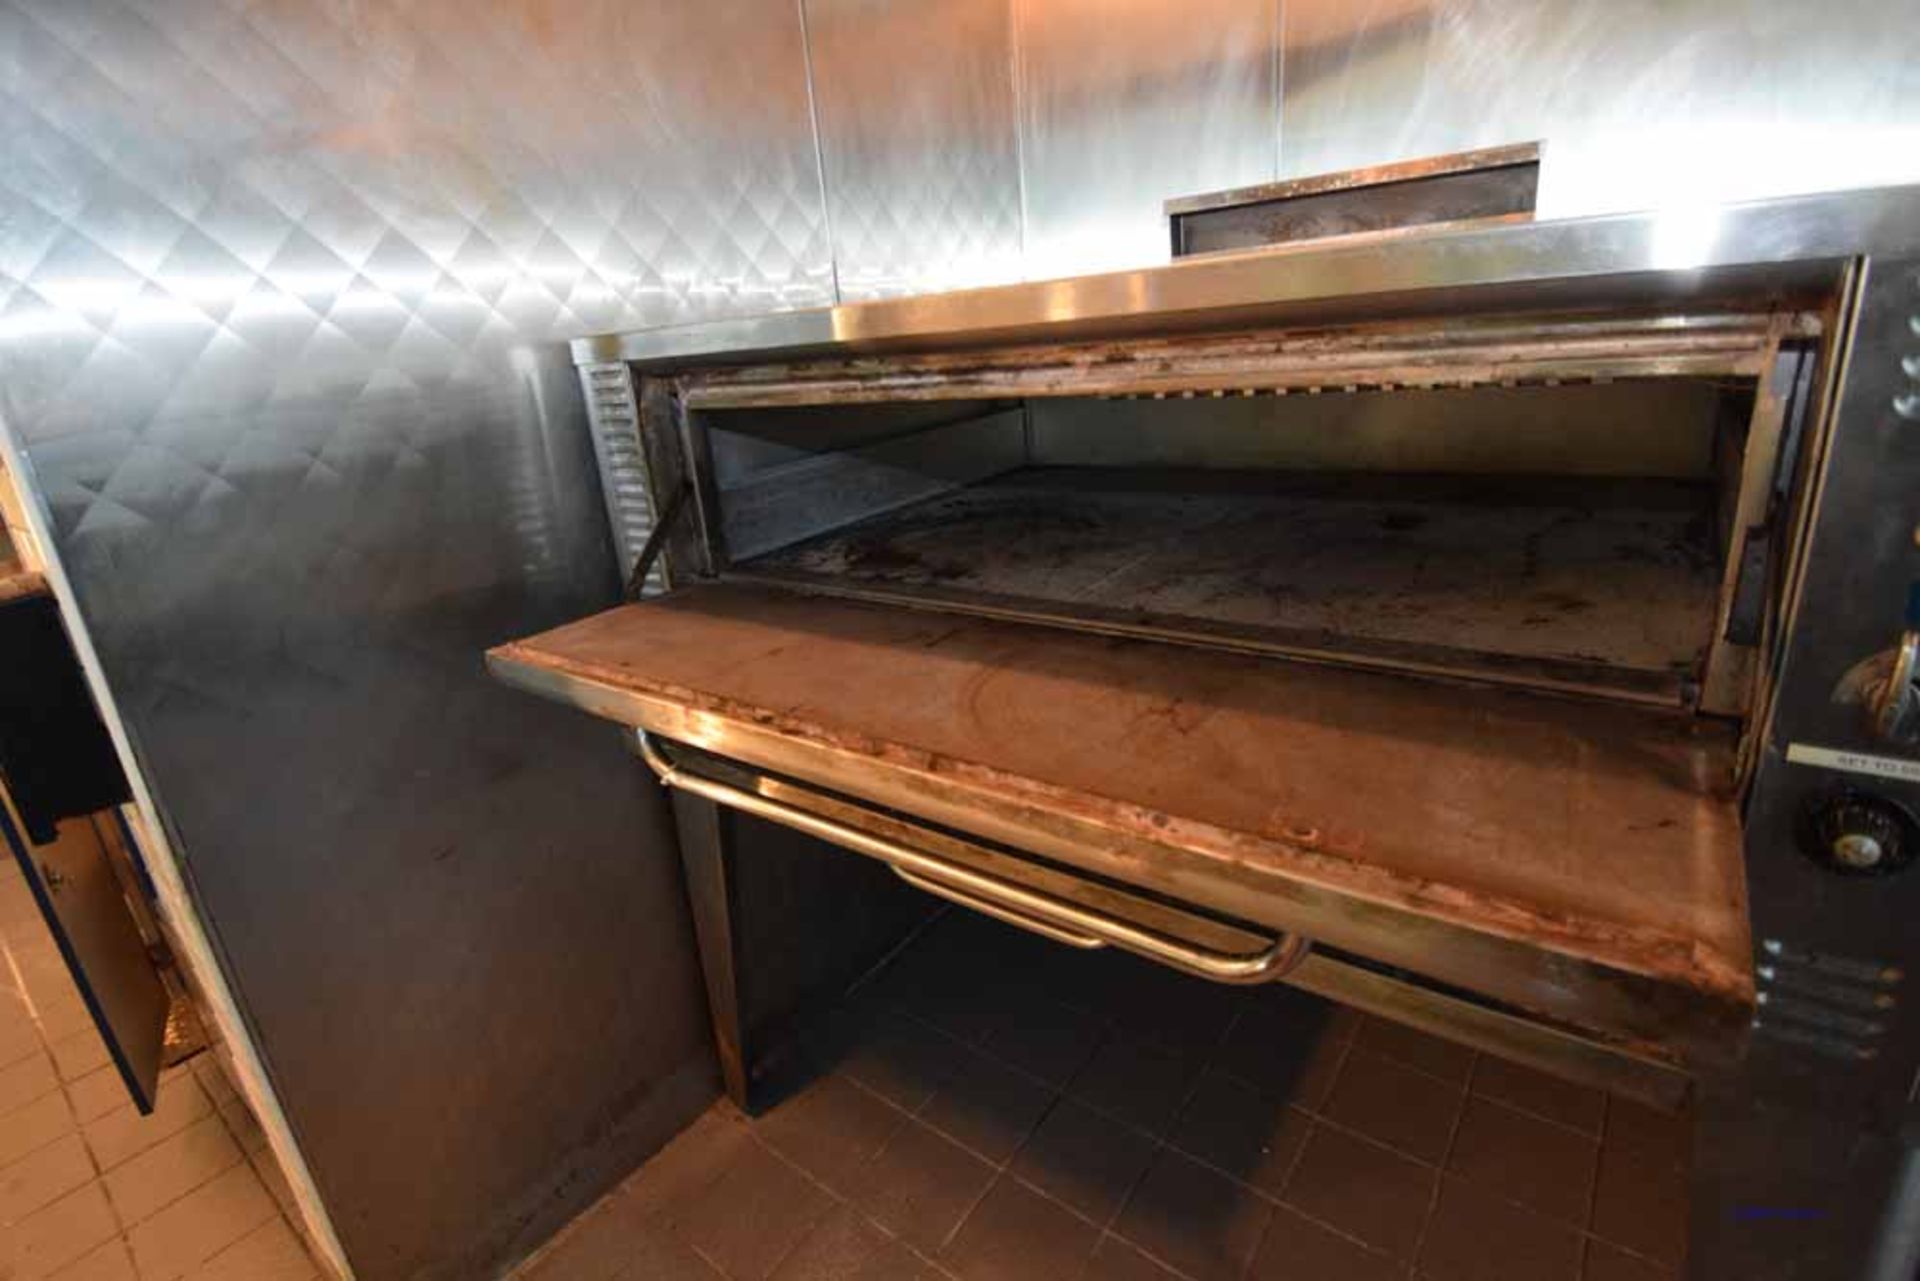 Blodgett 961P Single Pizza Deck Oven 60" Wide - Image 4 of 6